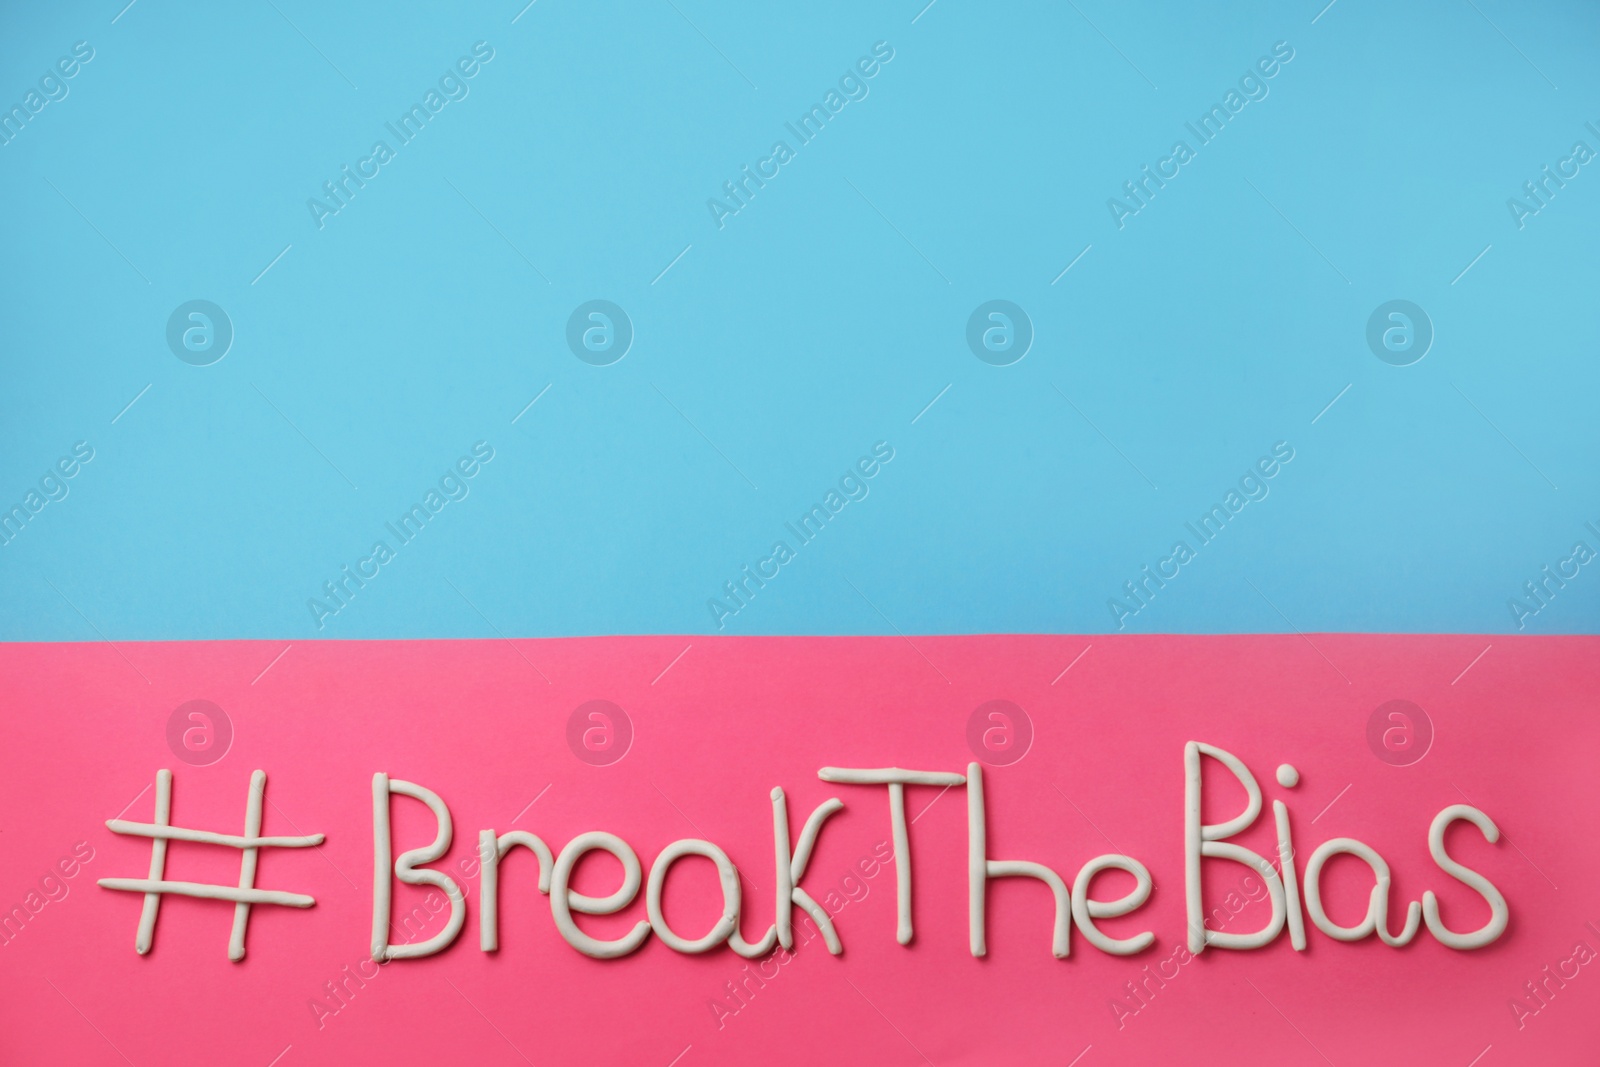 Photo of Hashtag BreakTheBias made of modeling clay on color background, top view. Space for text